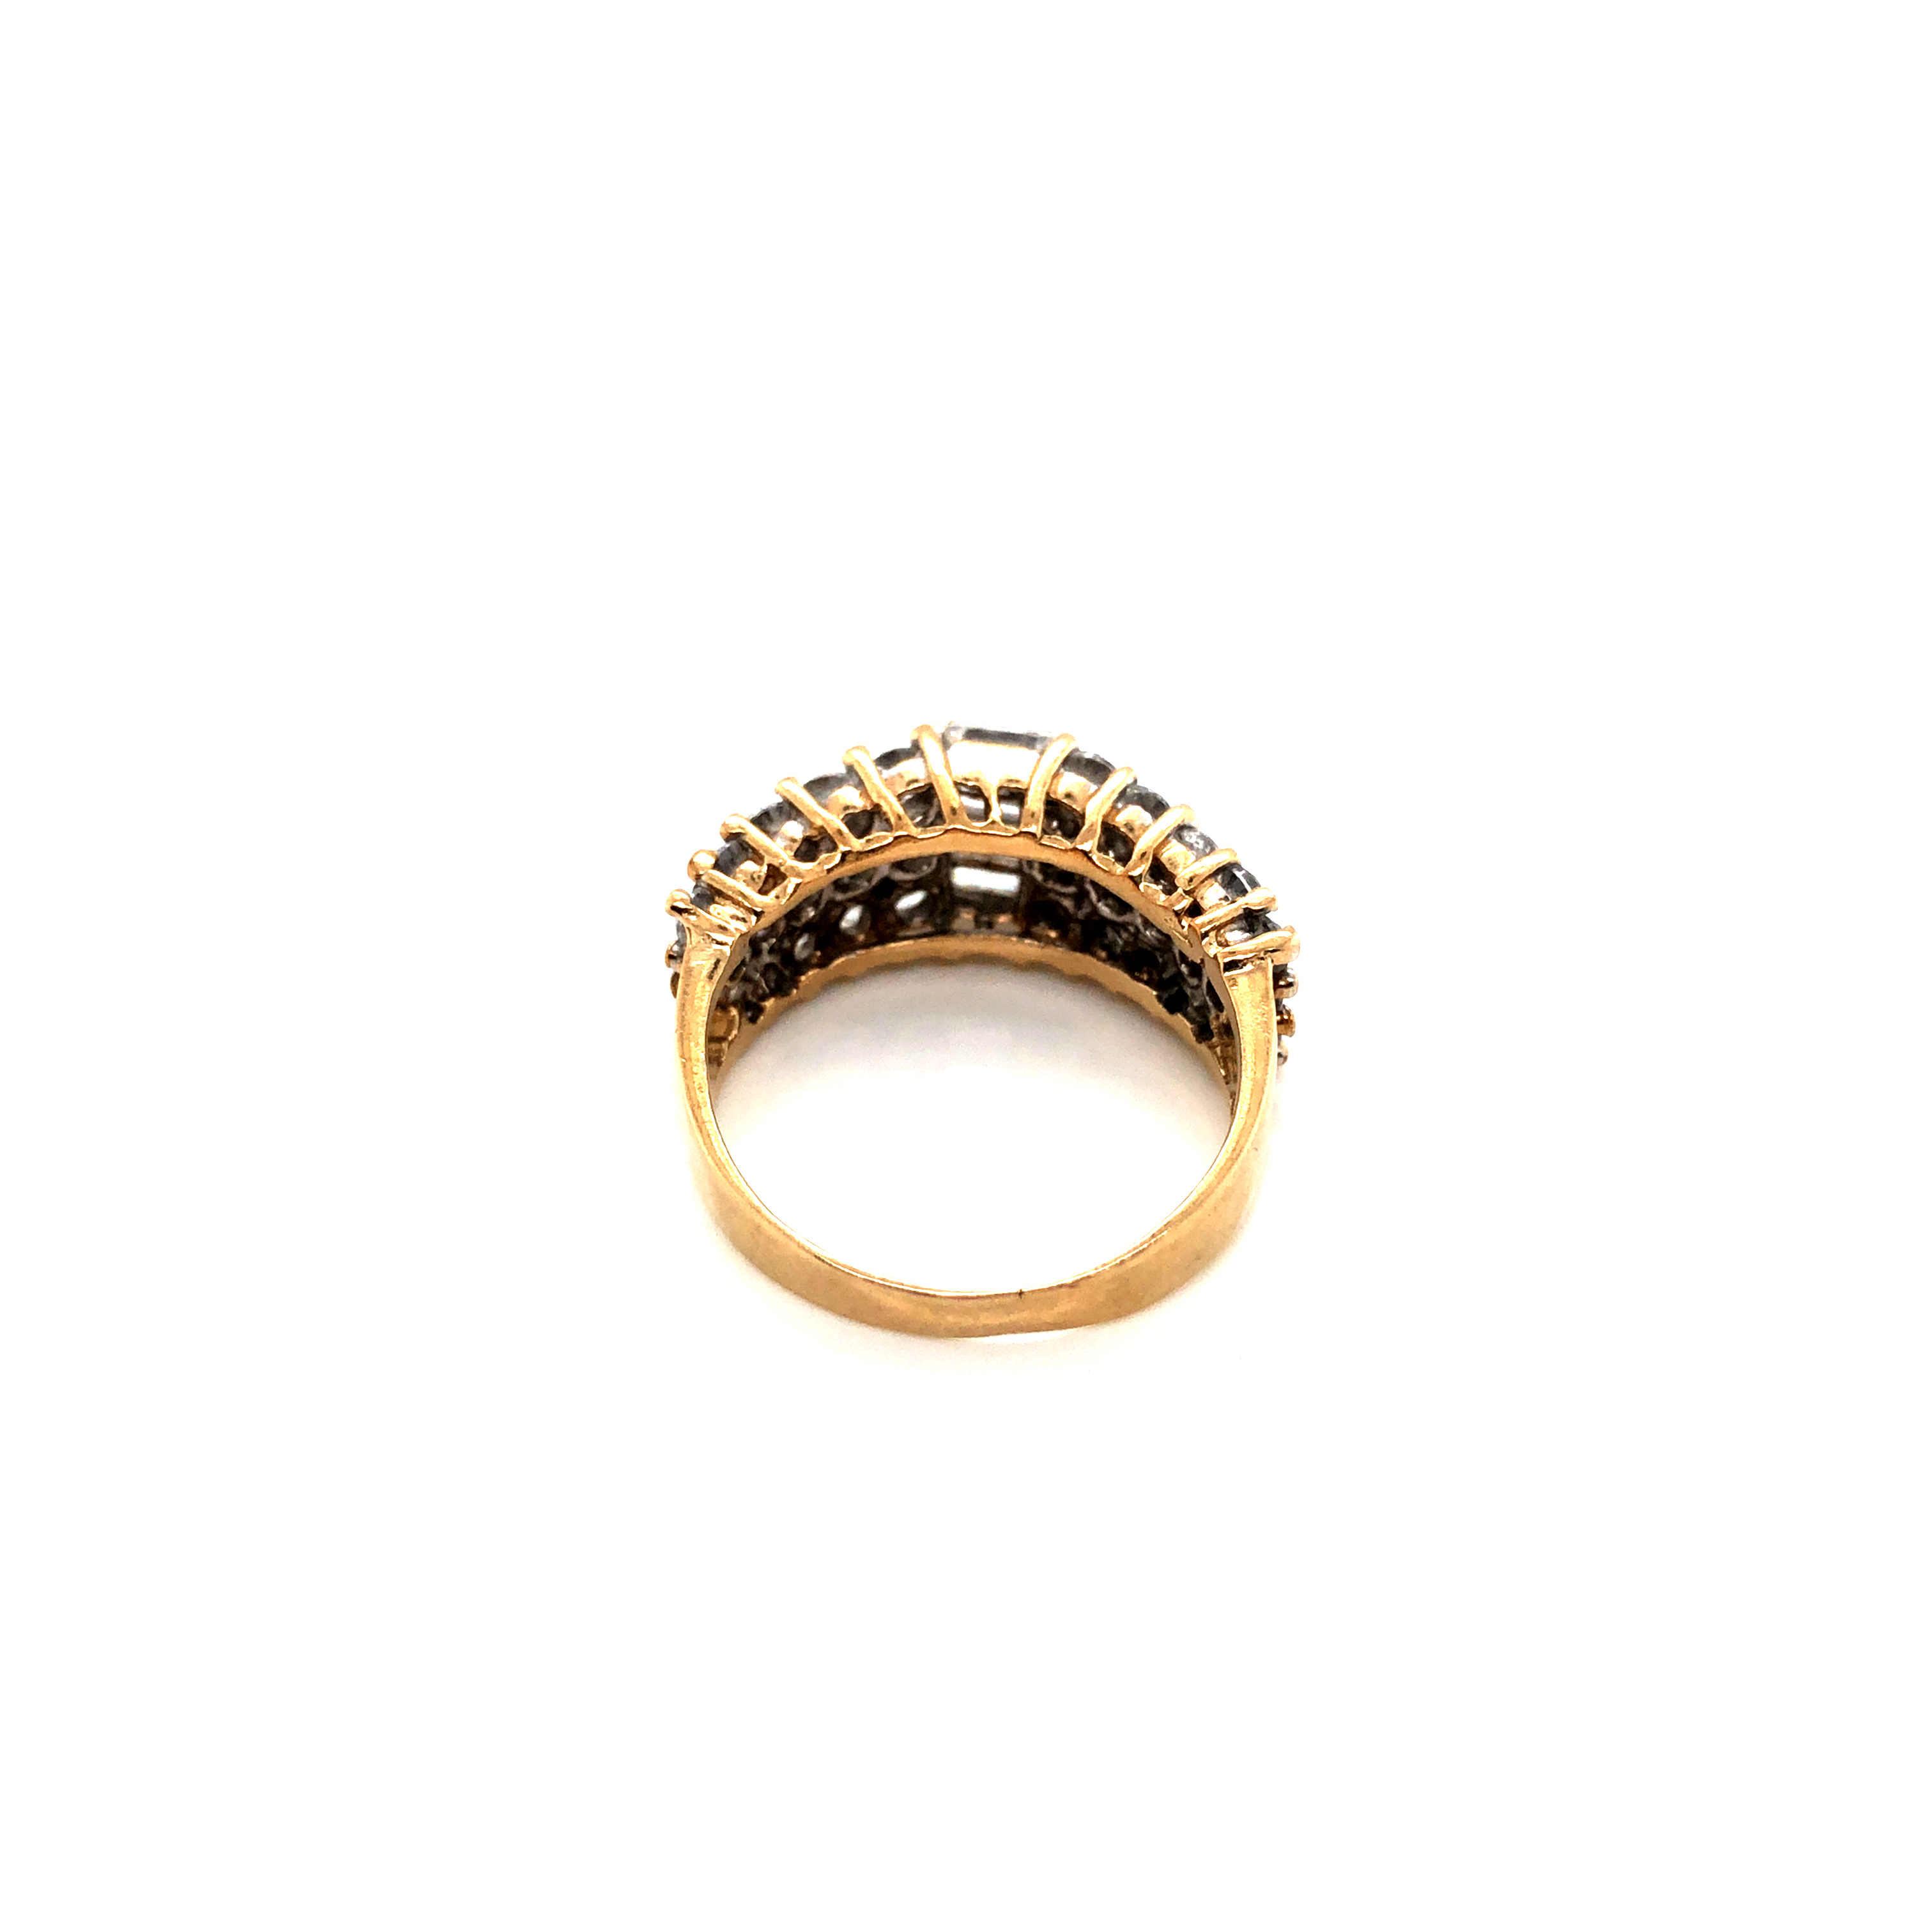 A HALLMARKED 9ct GOLD TAPERED CLAW SET CUBIC ZIRCONIA RING. FINGER SIZE N. WEIGHT 5.18grms. - Image 2 of 4